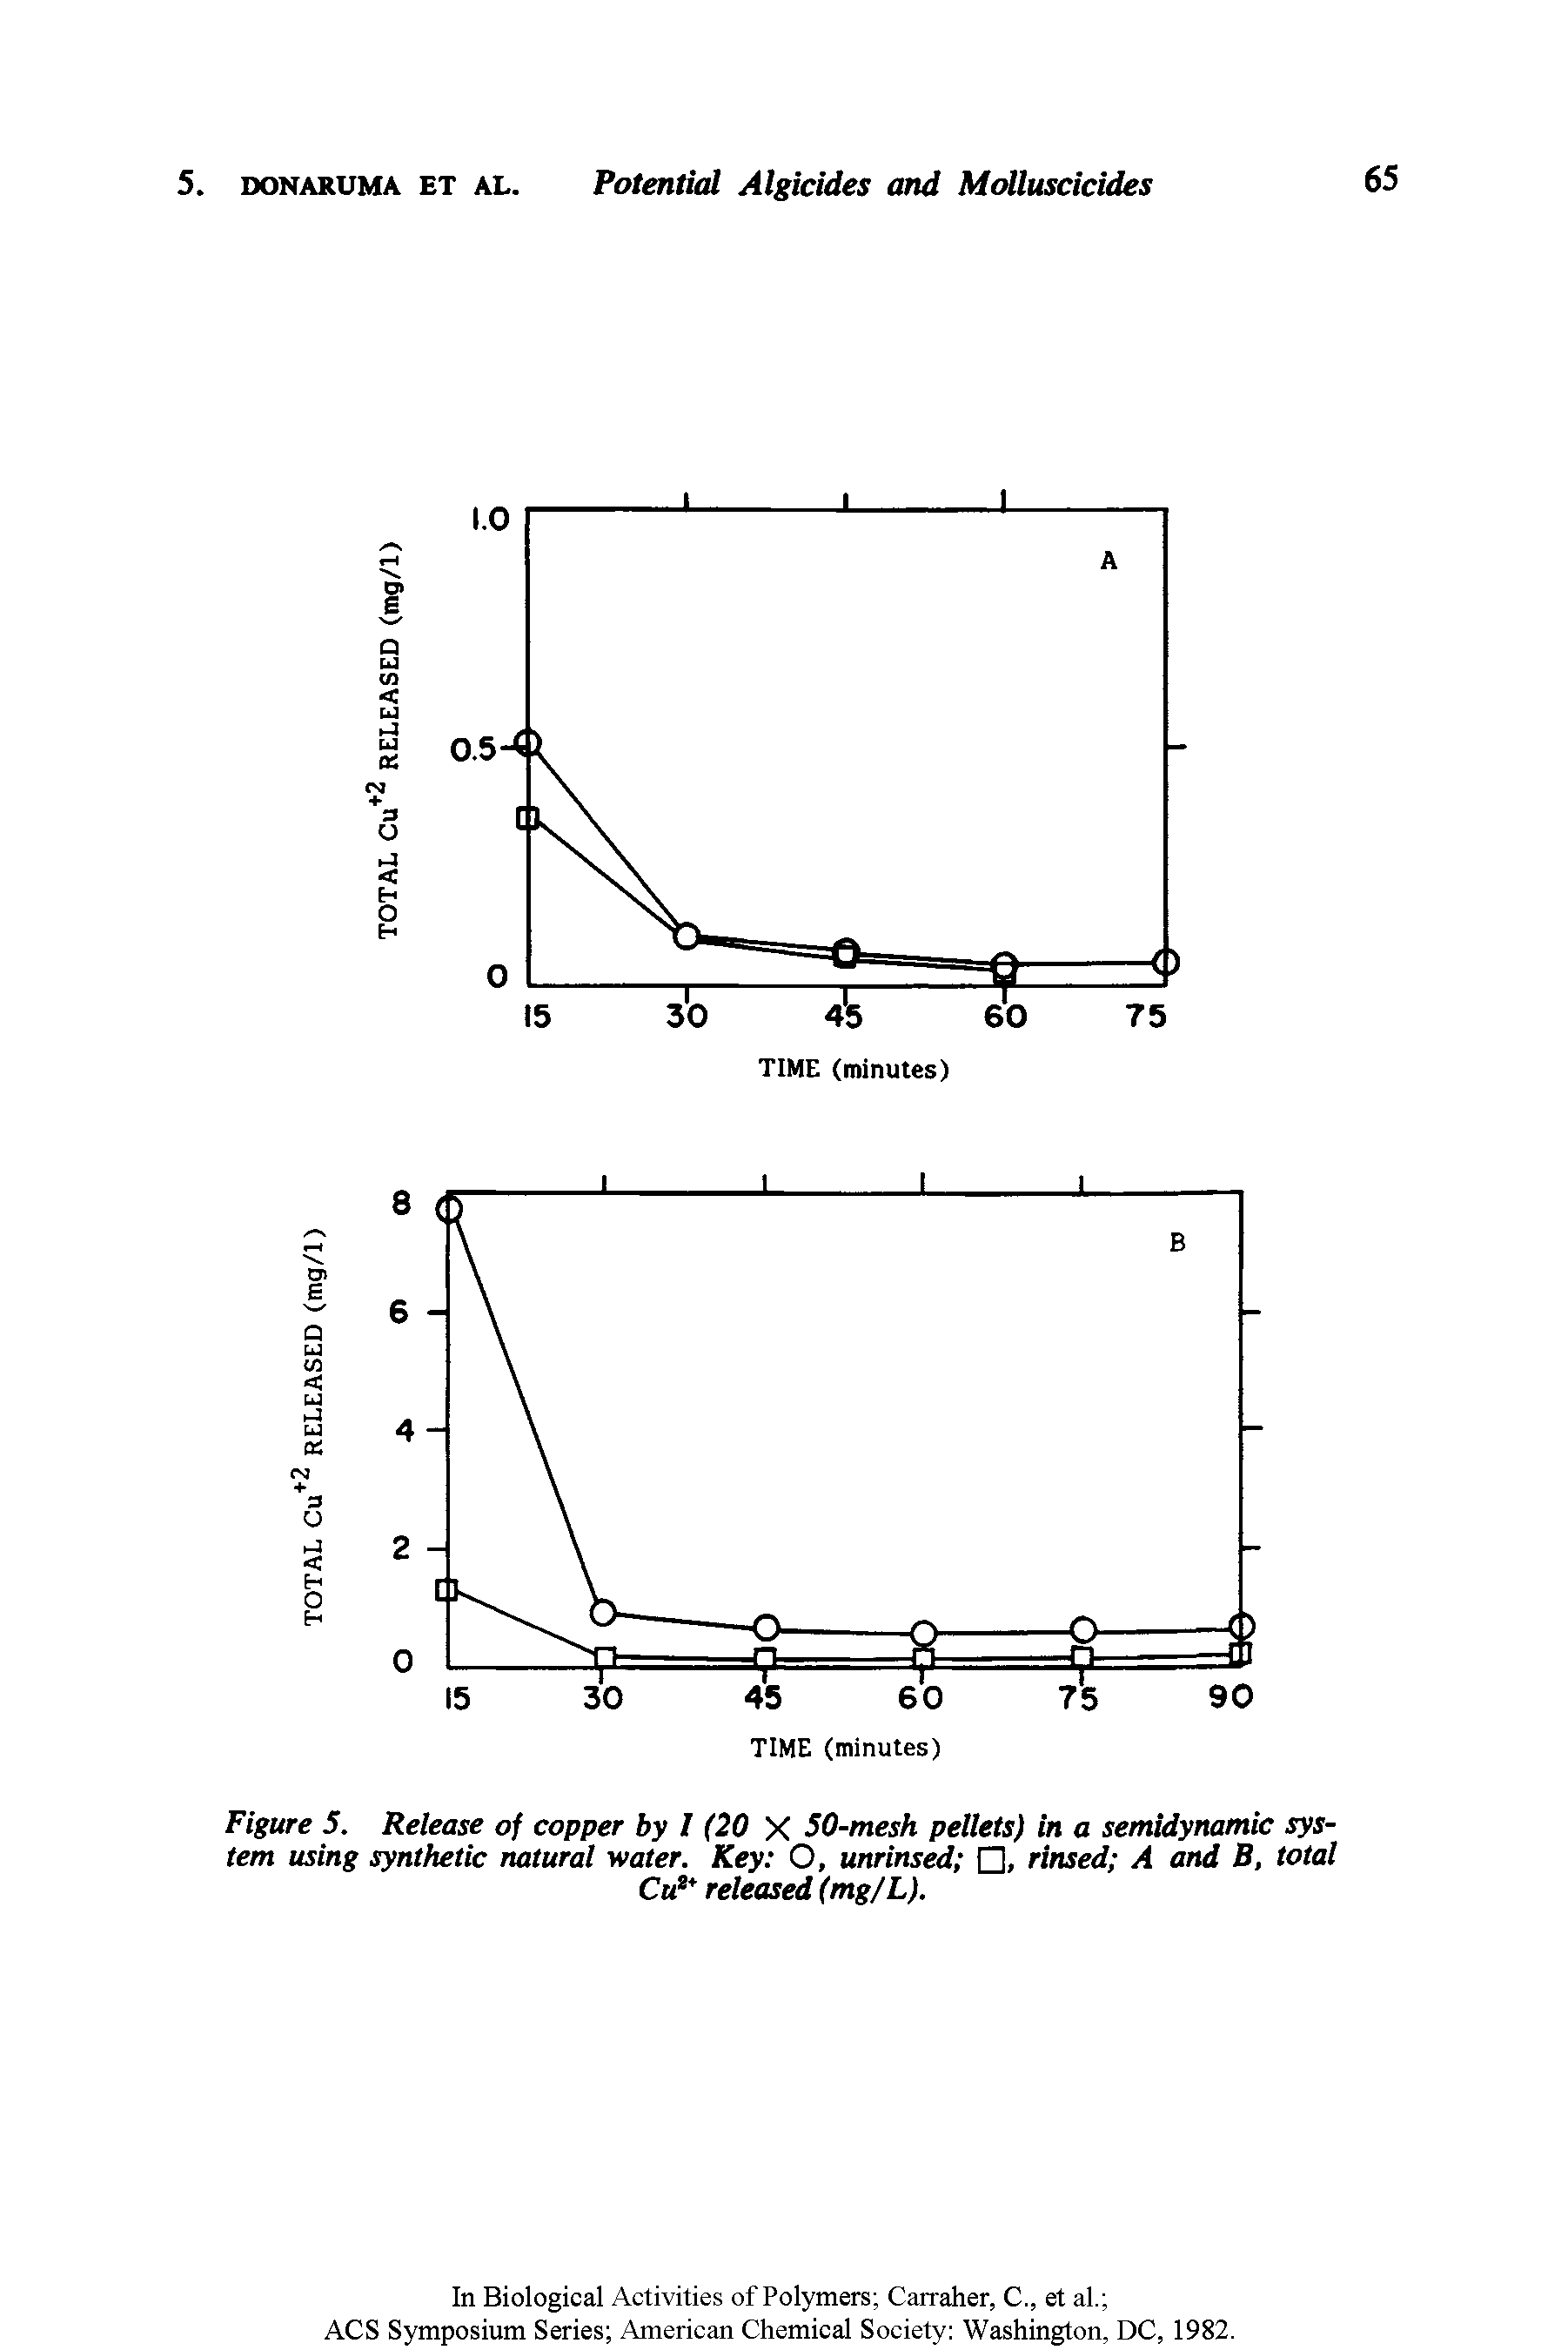 Figure 5, Release of copper by I (20 X 50-mesh pellets) in a semidynamic system using synthetic natural -water. Key Q, unrinsed , rinsed A and B, total Cu released (mg/L),...